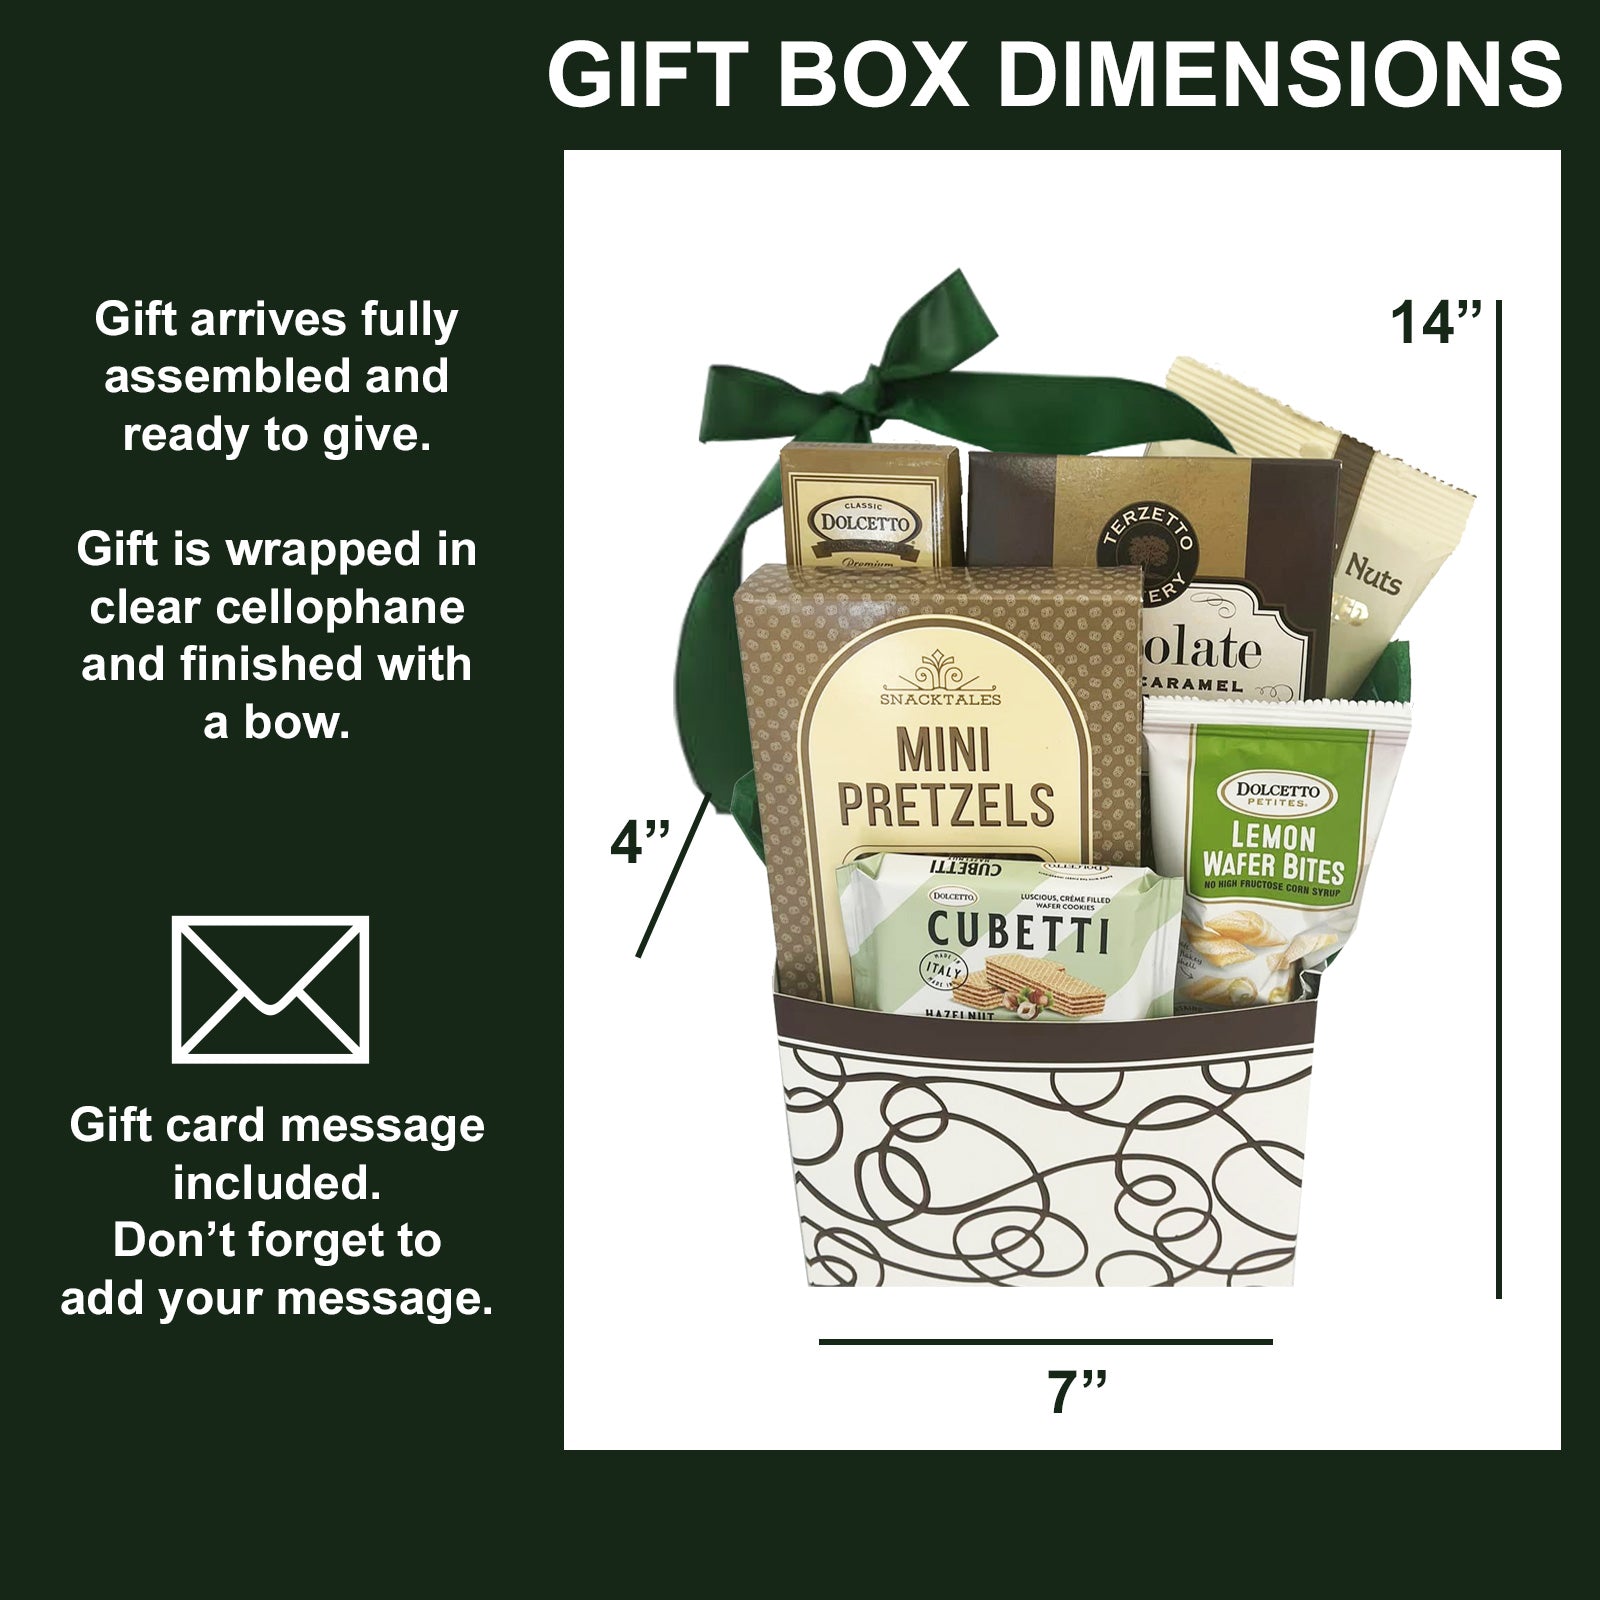 TY Gift Box with Cookies and Snacks has a unisex design that works for both men and women.